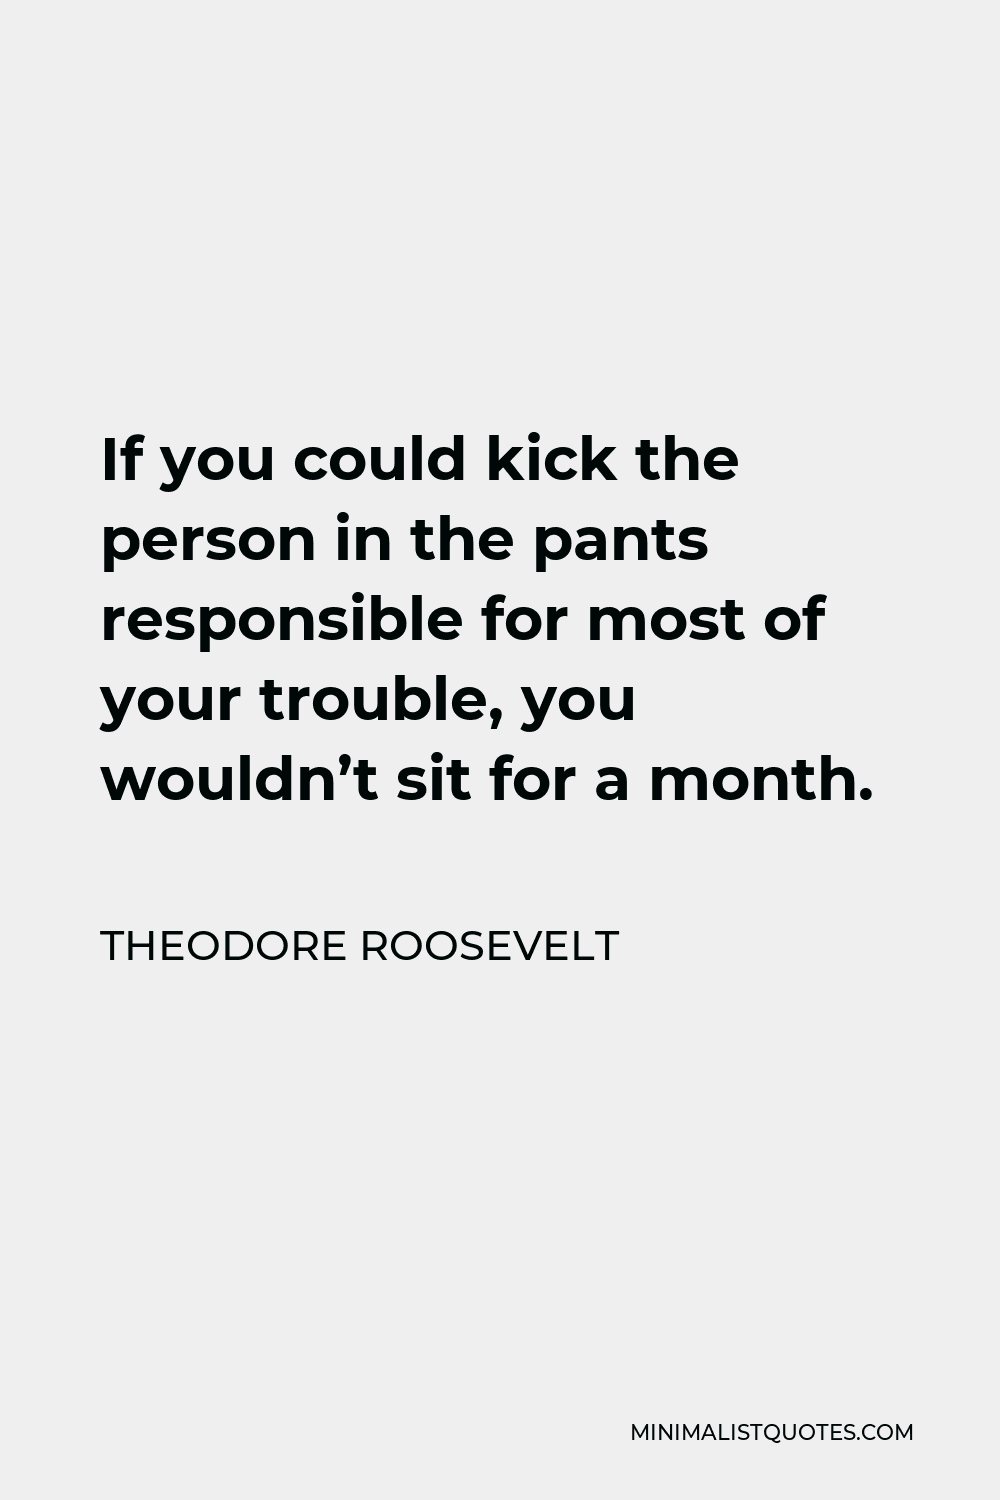 Theodore Roosevelt Quote - If you could kick the person in the pants responsible for most of your trouble, you wouldn’t sit for a month.